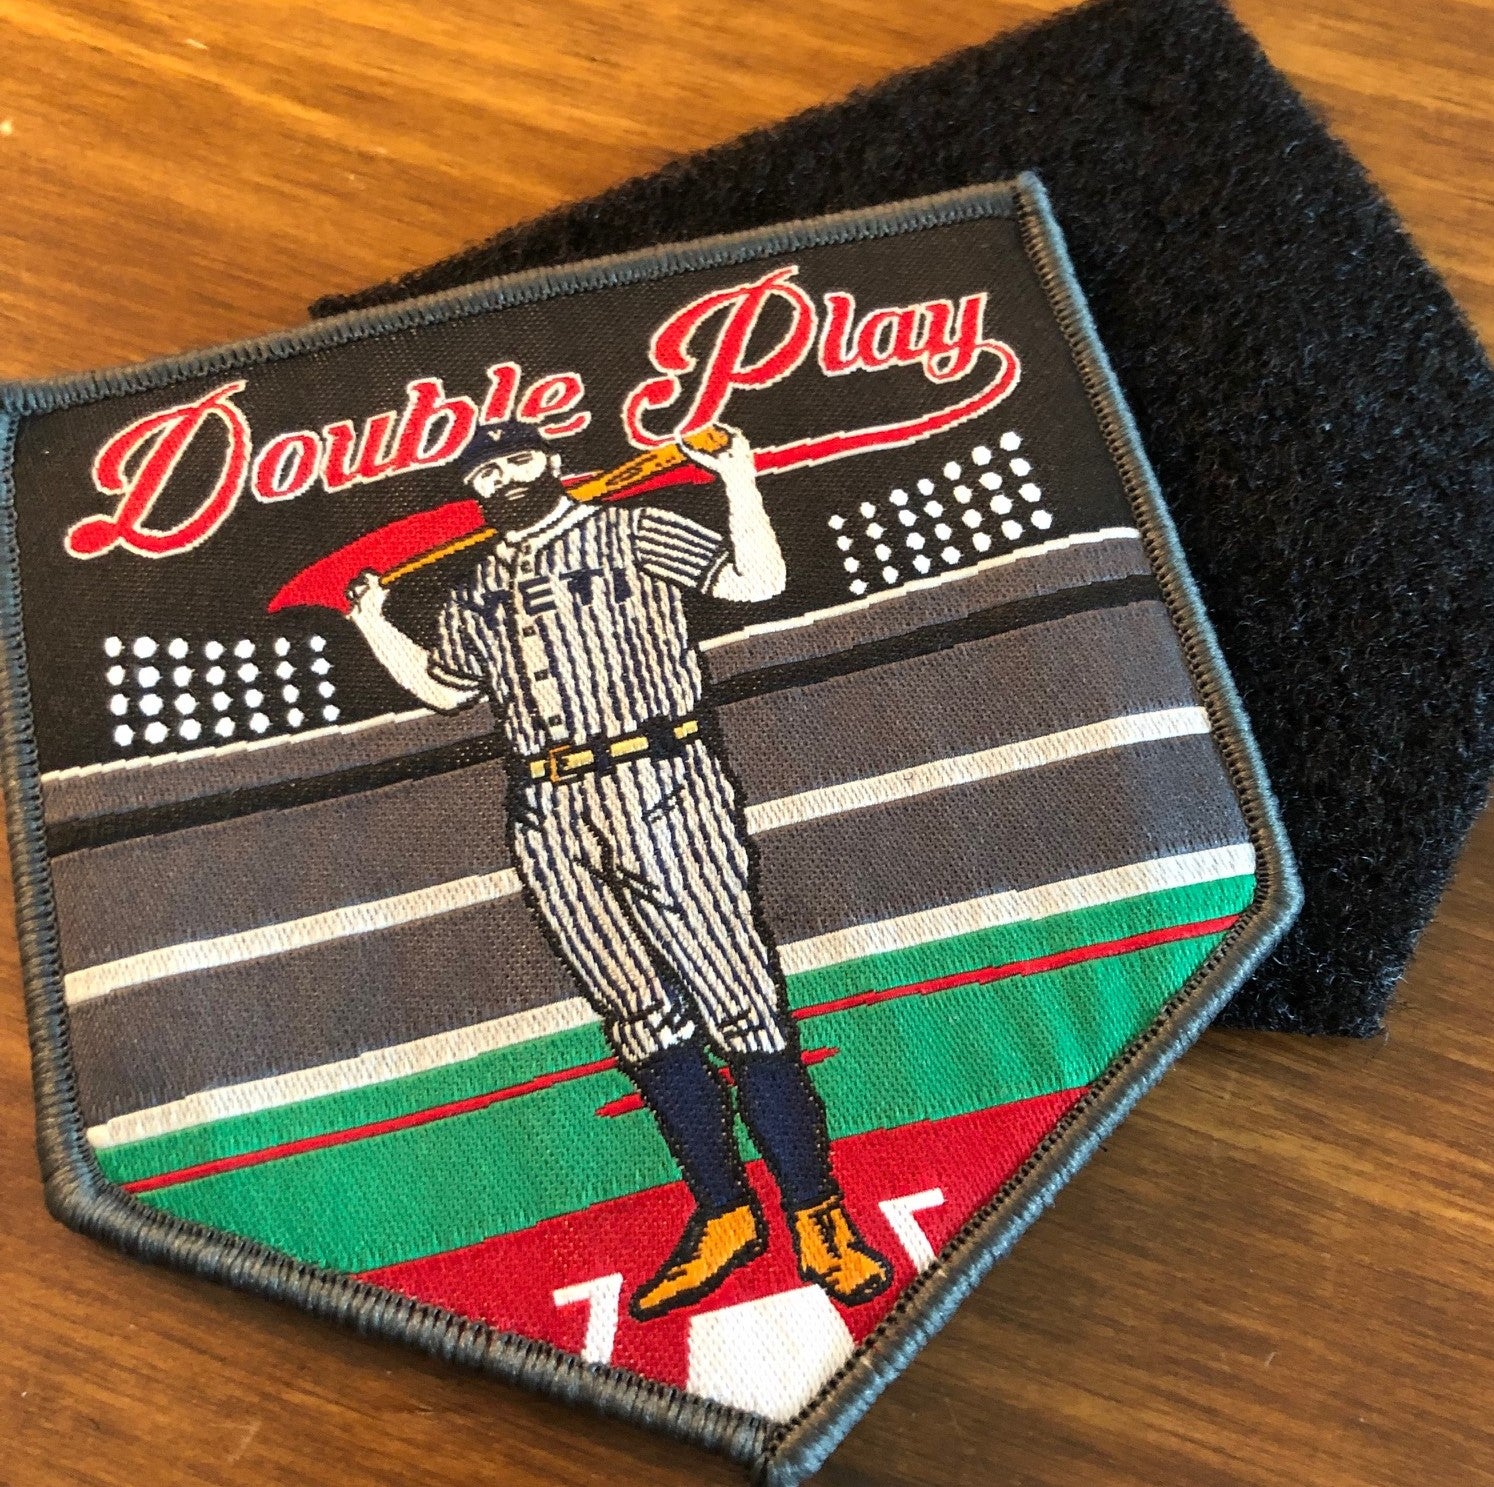 Woven Patches - VELCRO®Brand backed – Custom Couture Label Company